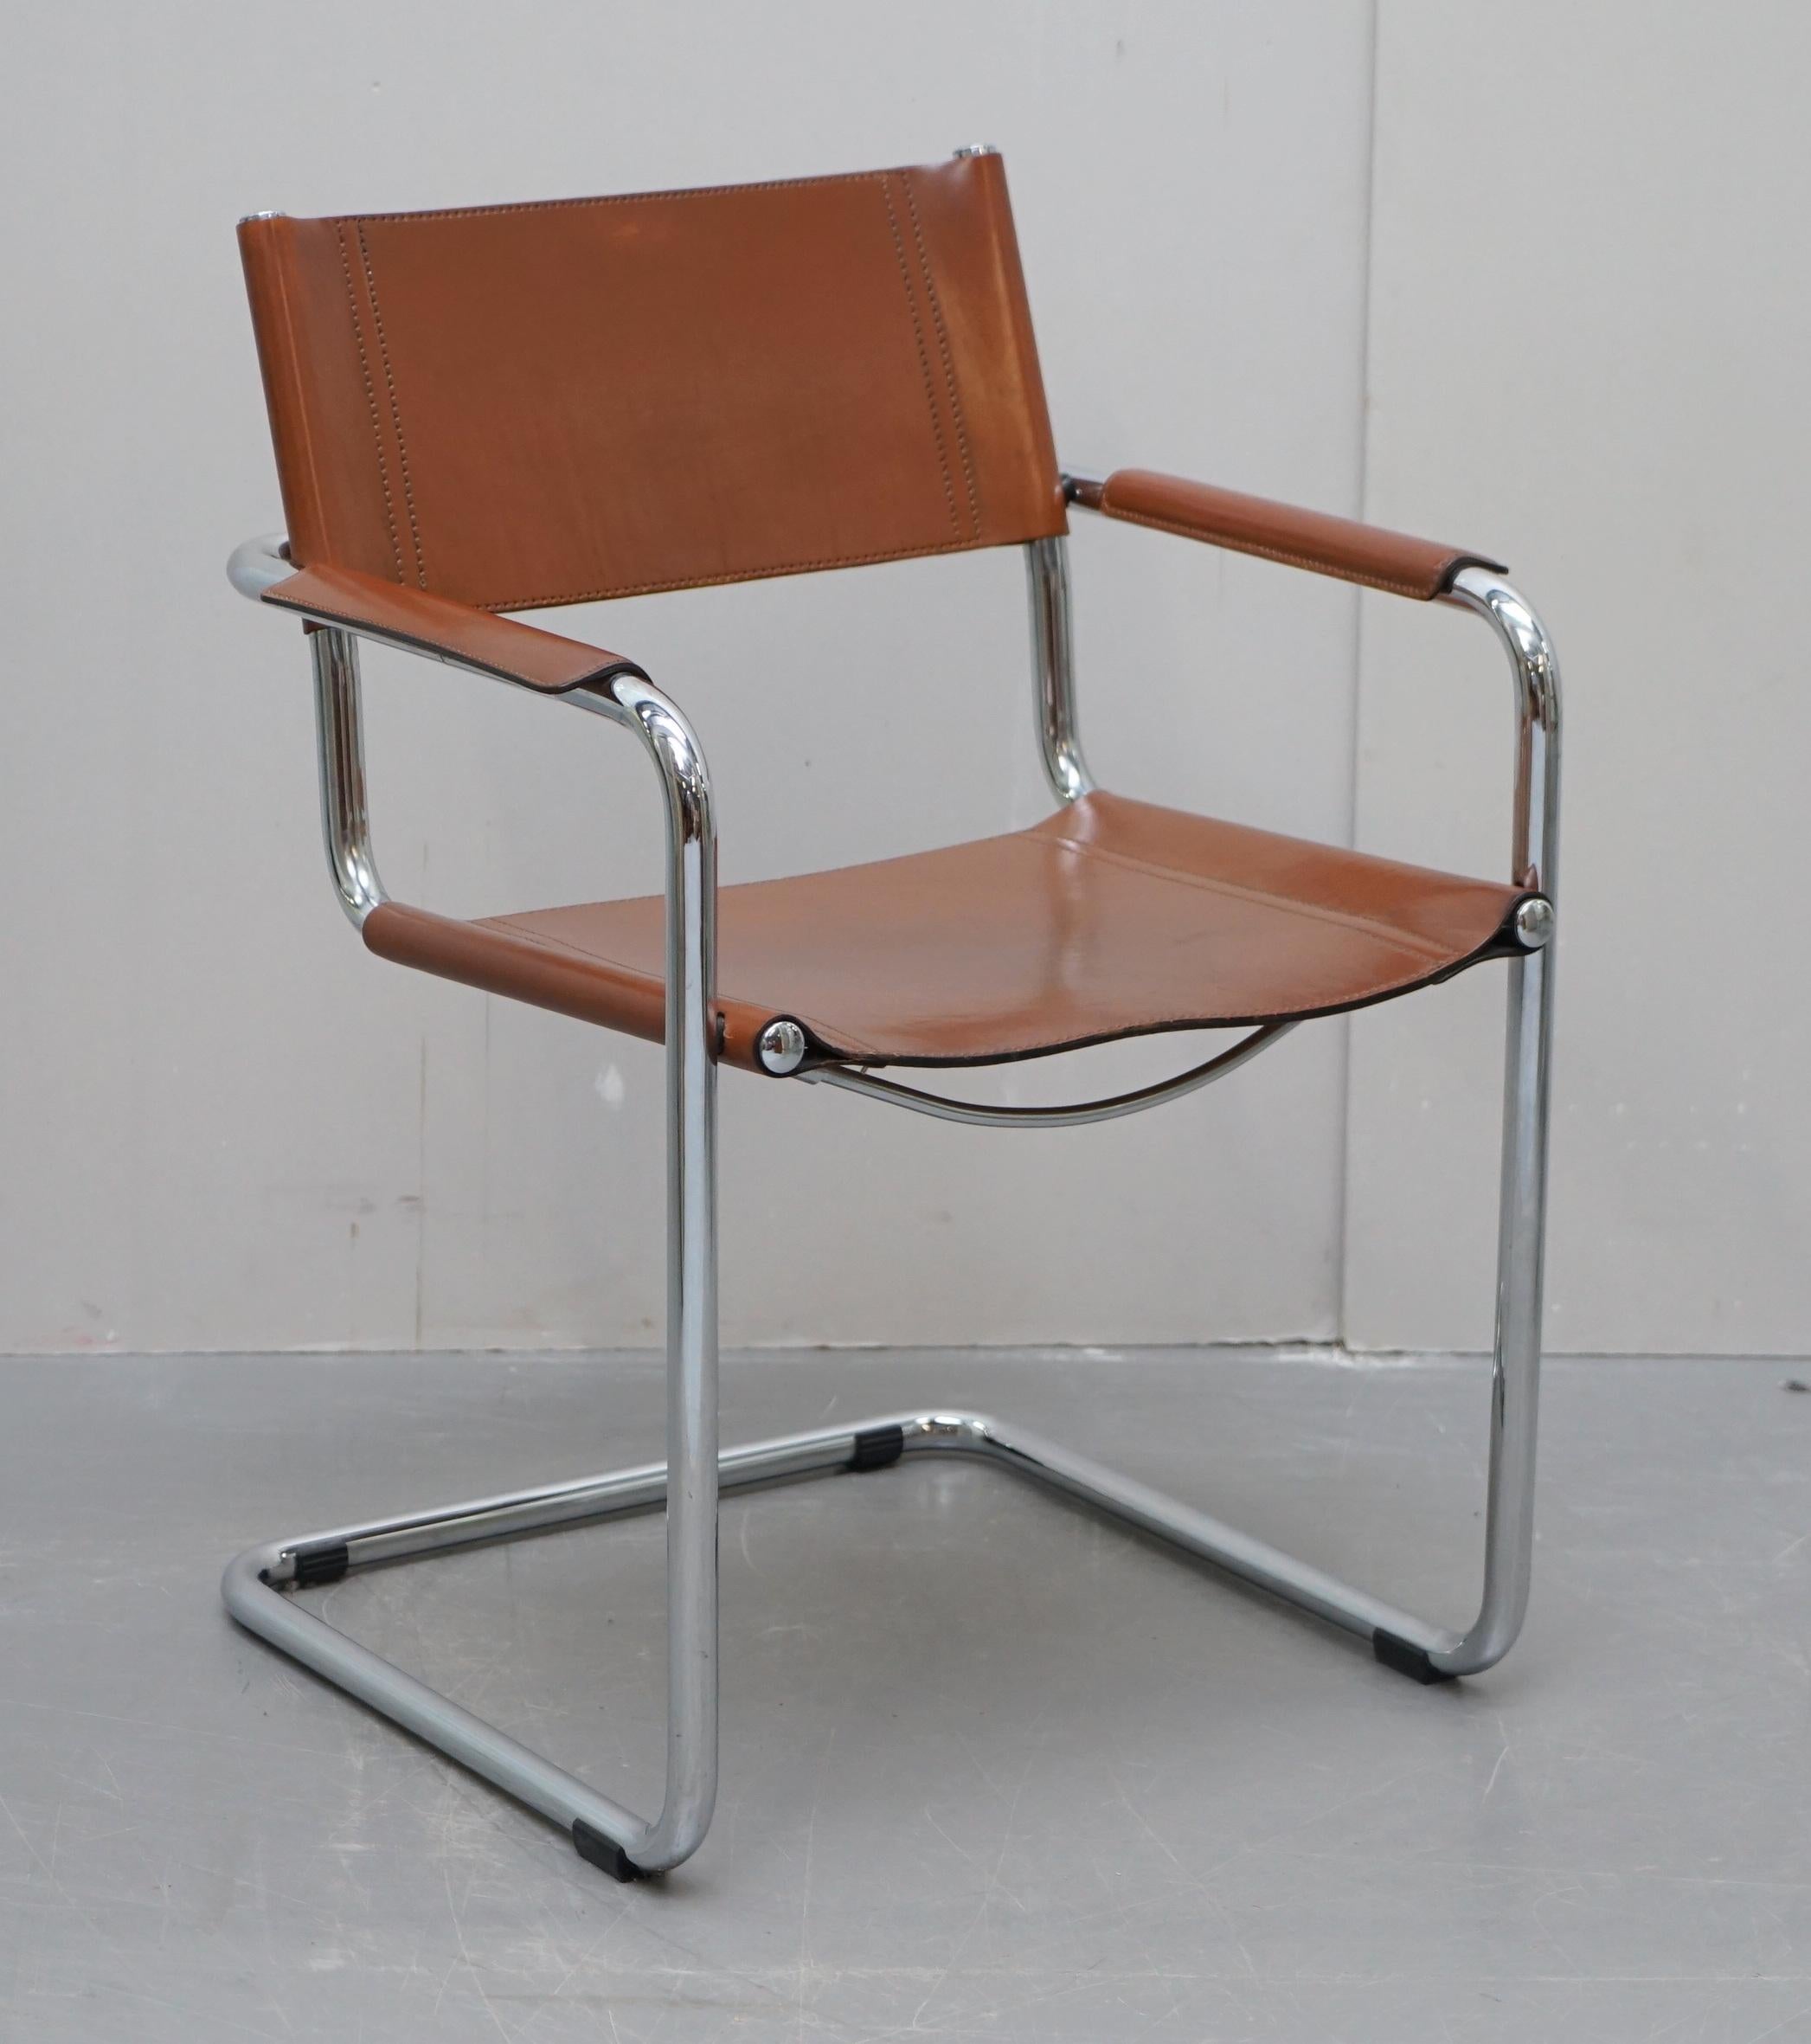 We are delighted to offer for sale this sublime suite of original fully stamped Matteo Grassi MG5 circa 1970 cognac brown leather armchairs designed by the genius that was Marcel Breuer

If you’re looking at this listing then the chances are you